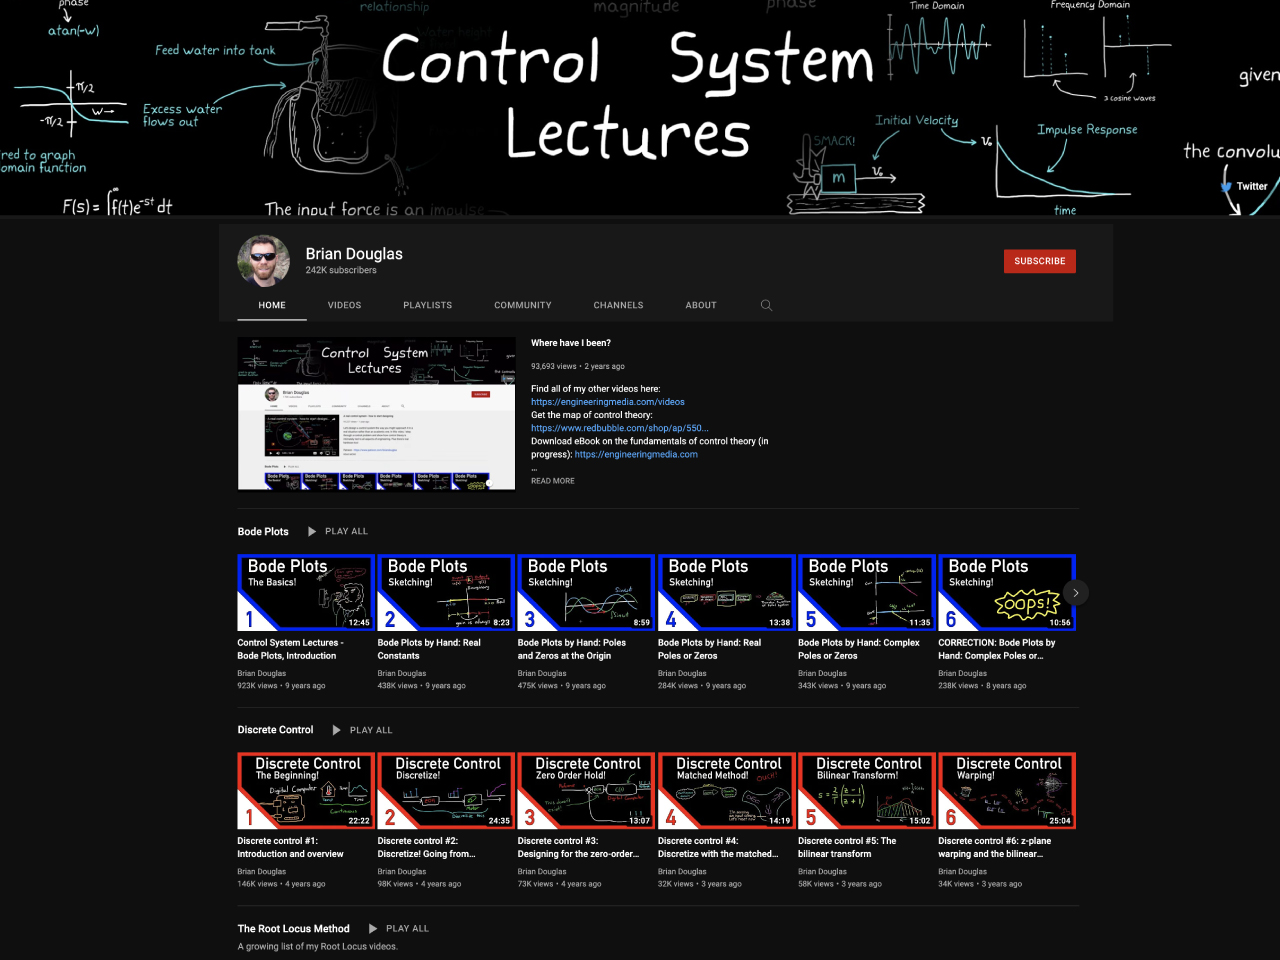 Control Systems Lectures